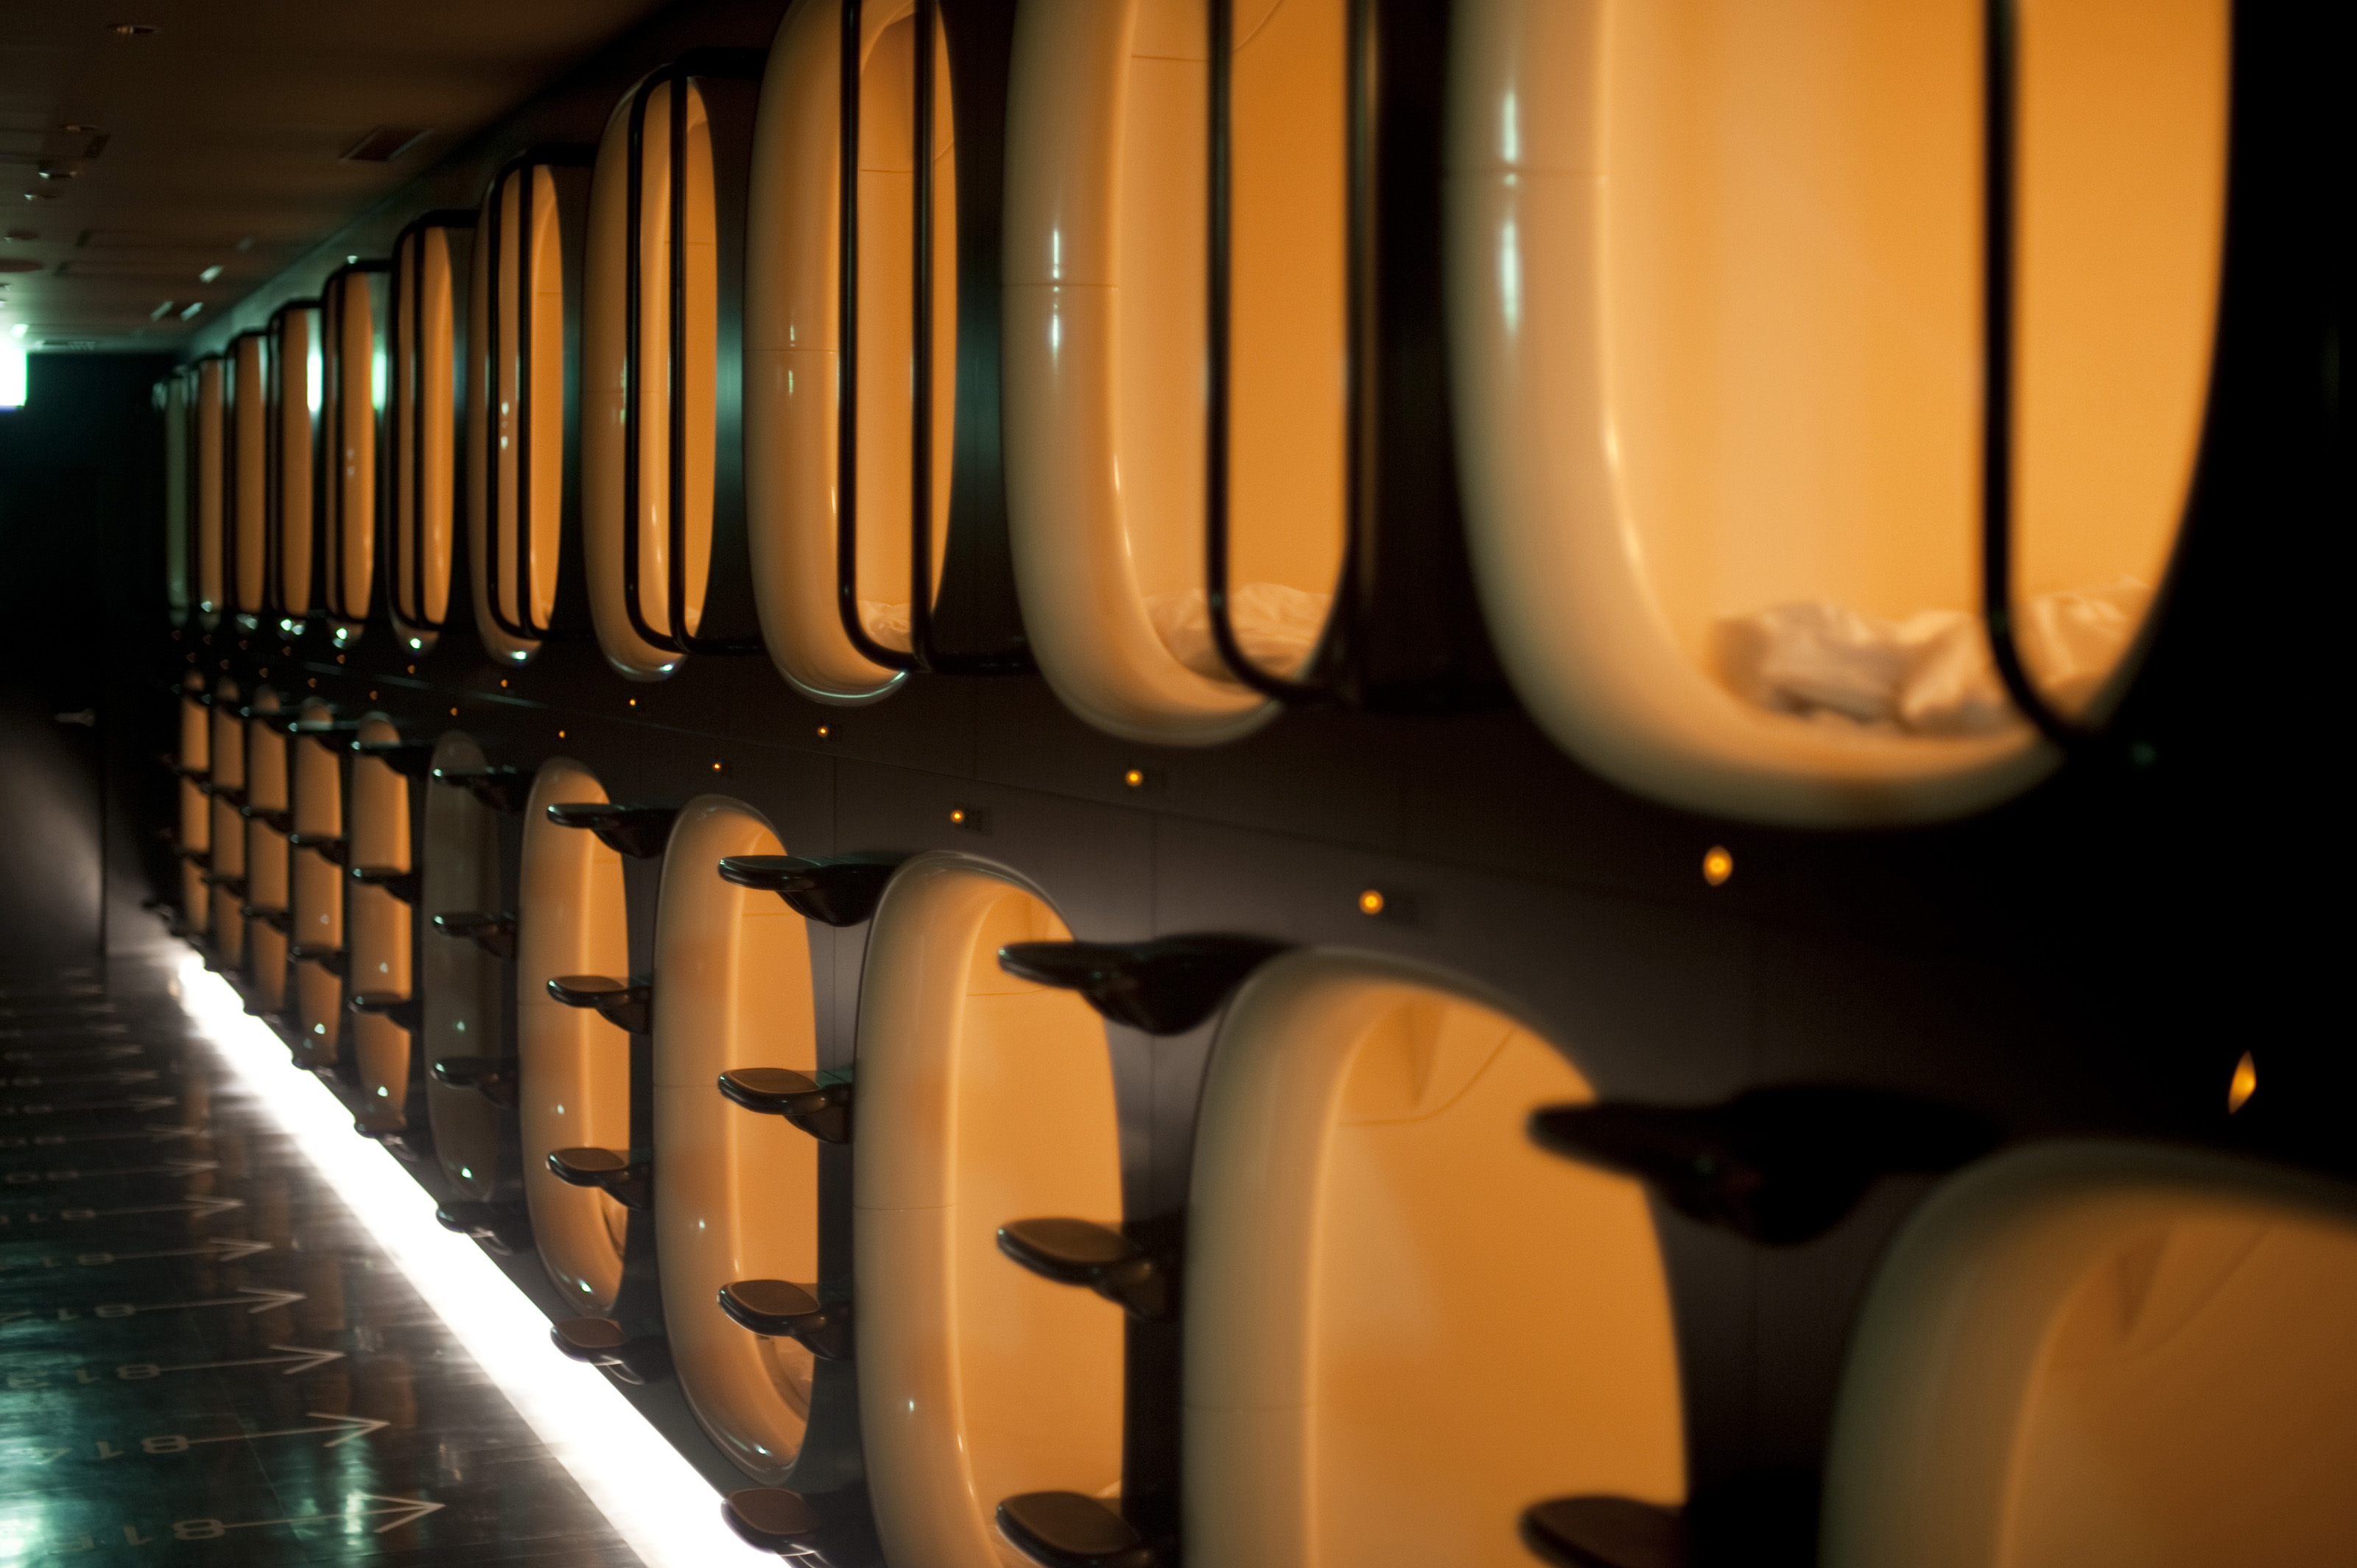 1,505 Capsule Hotel Royalty-Free Photos and Stock Images